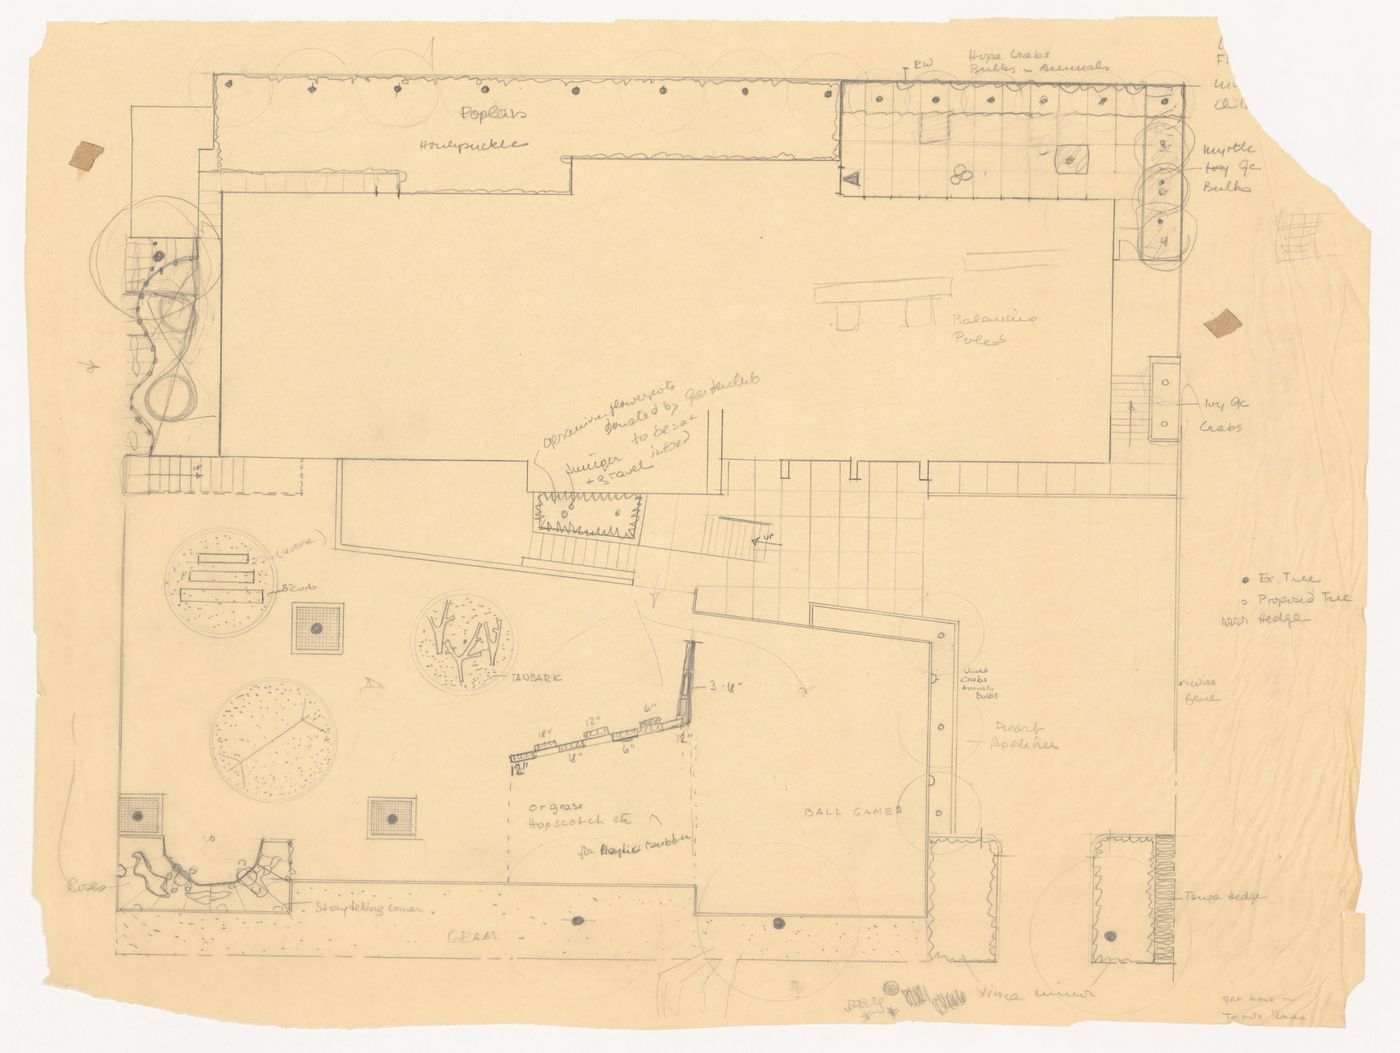 Plan for Earl's Court Children's Home, St. Clair Gardens, Vancouver, British Columbia